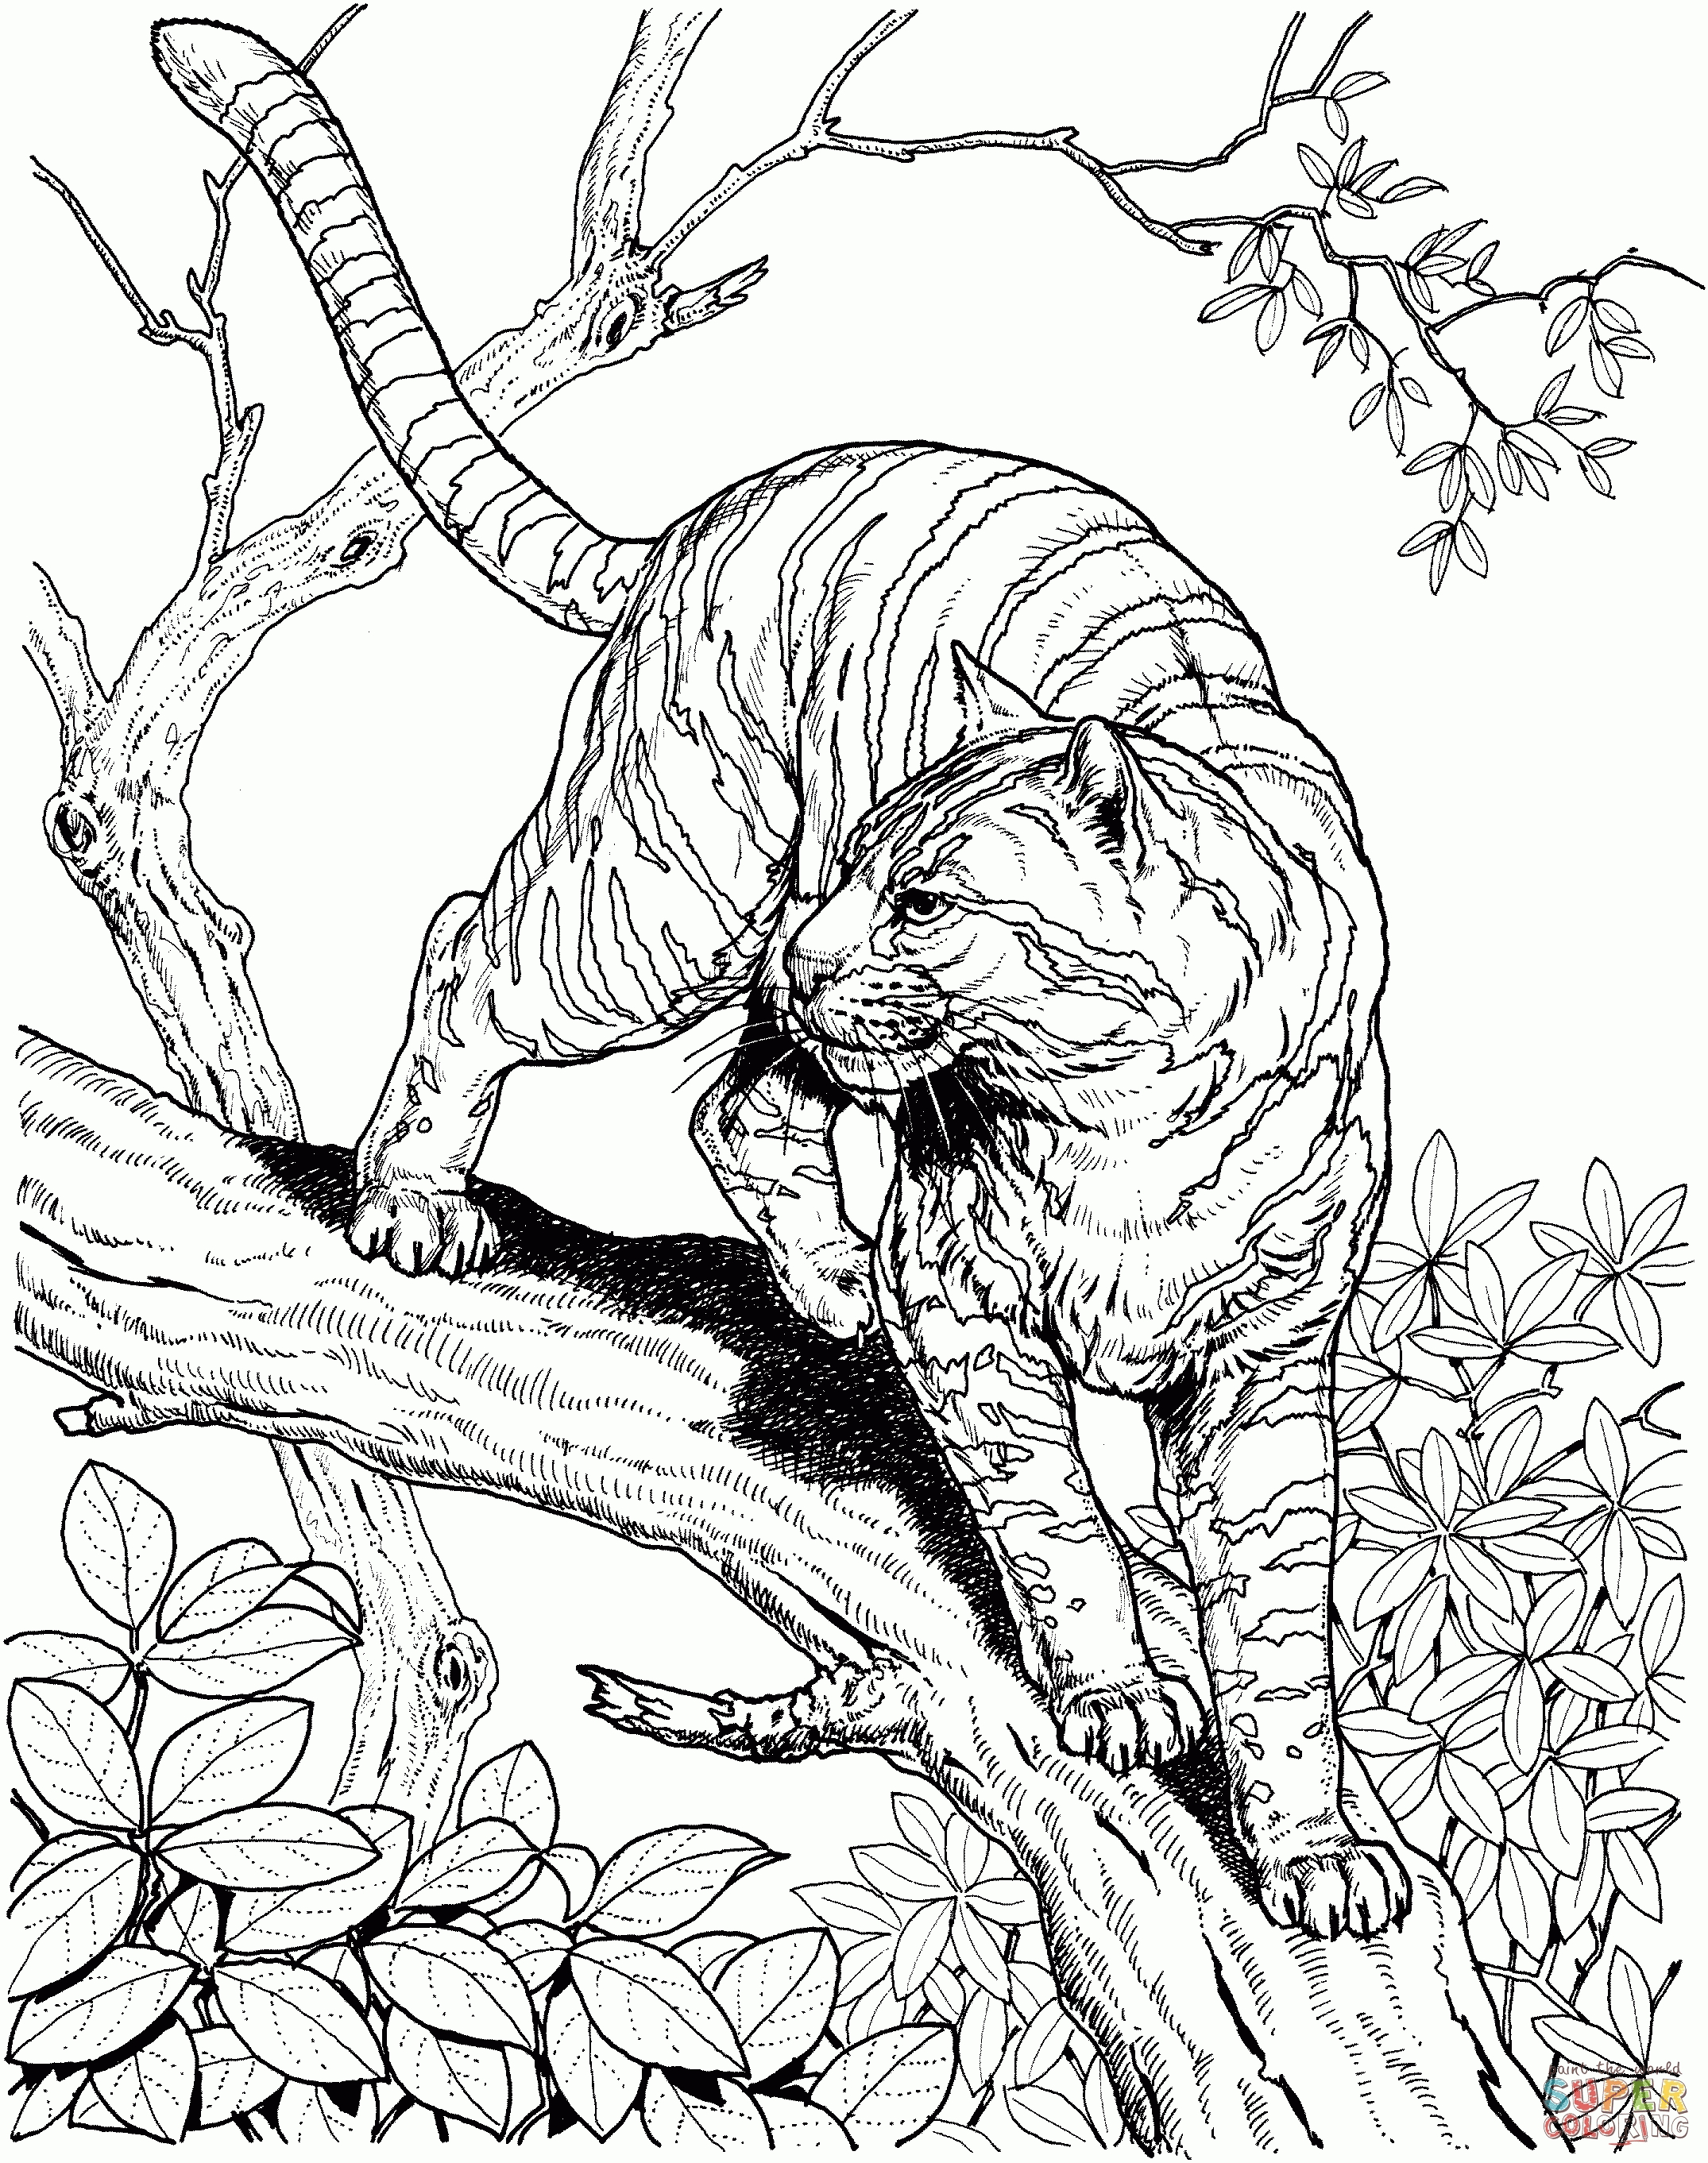 Jungle Coloring Pages Coloring Pages Jungle Scene Coloring Pages Animal Freee For Kids